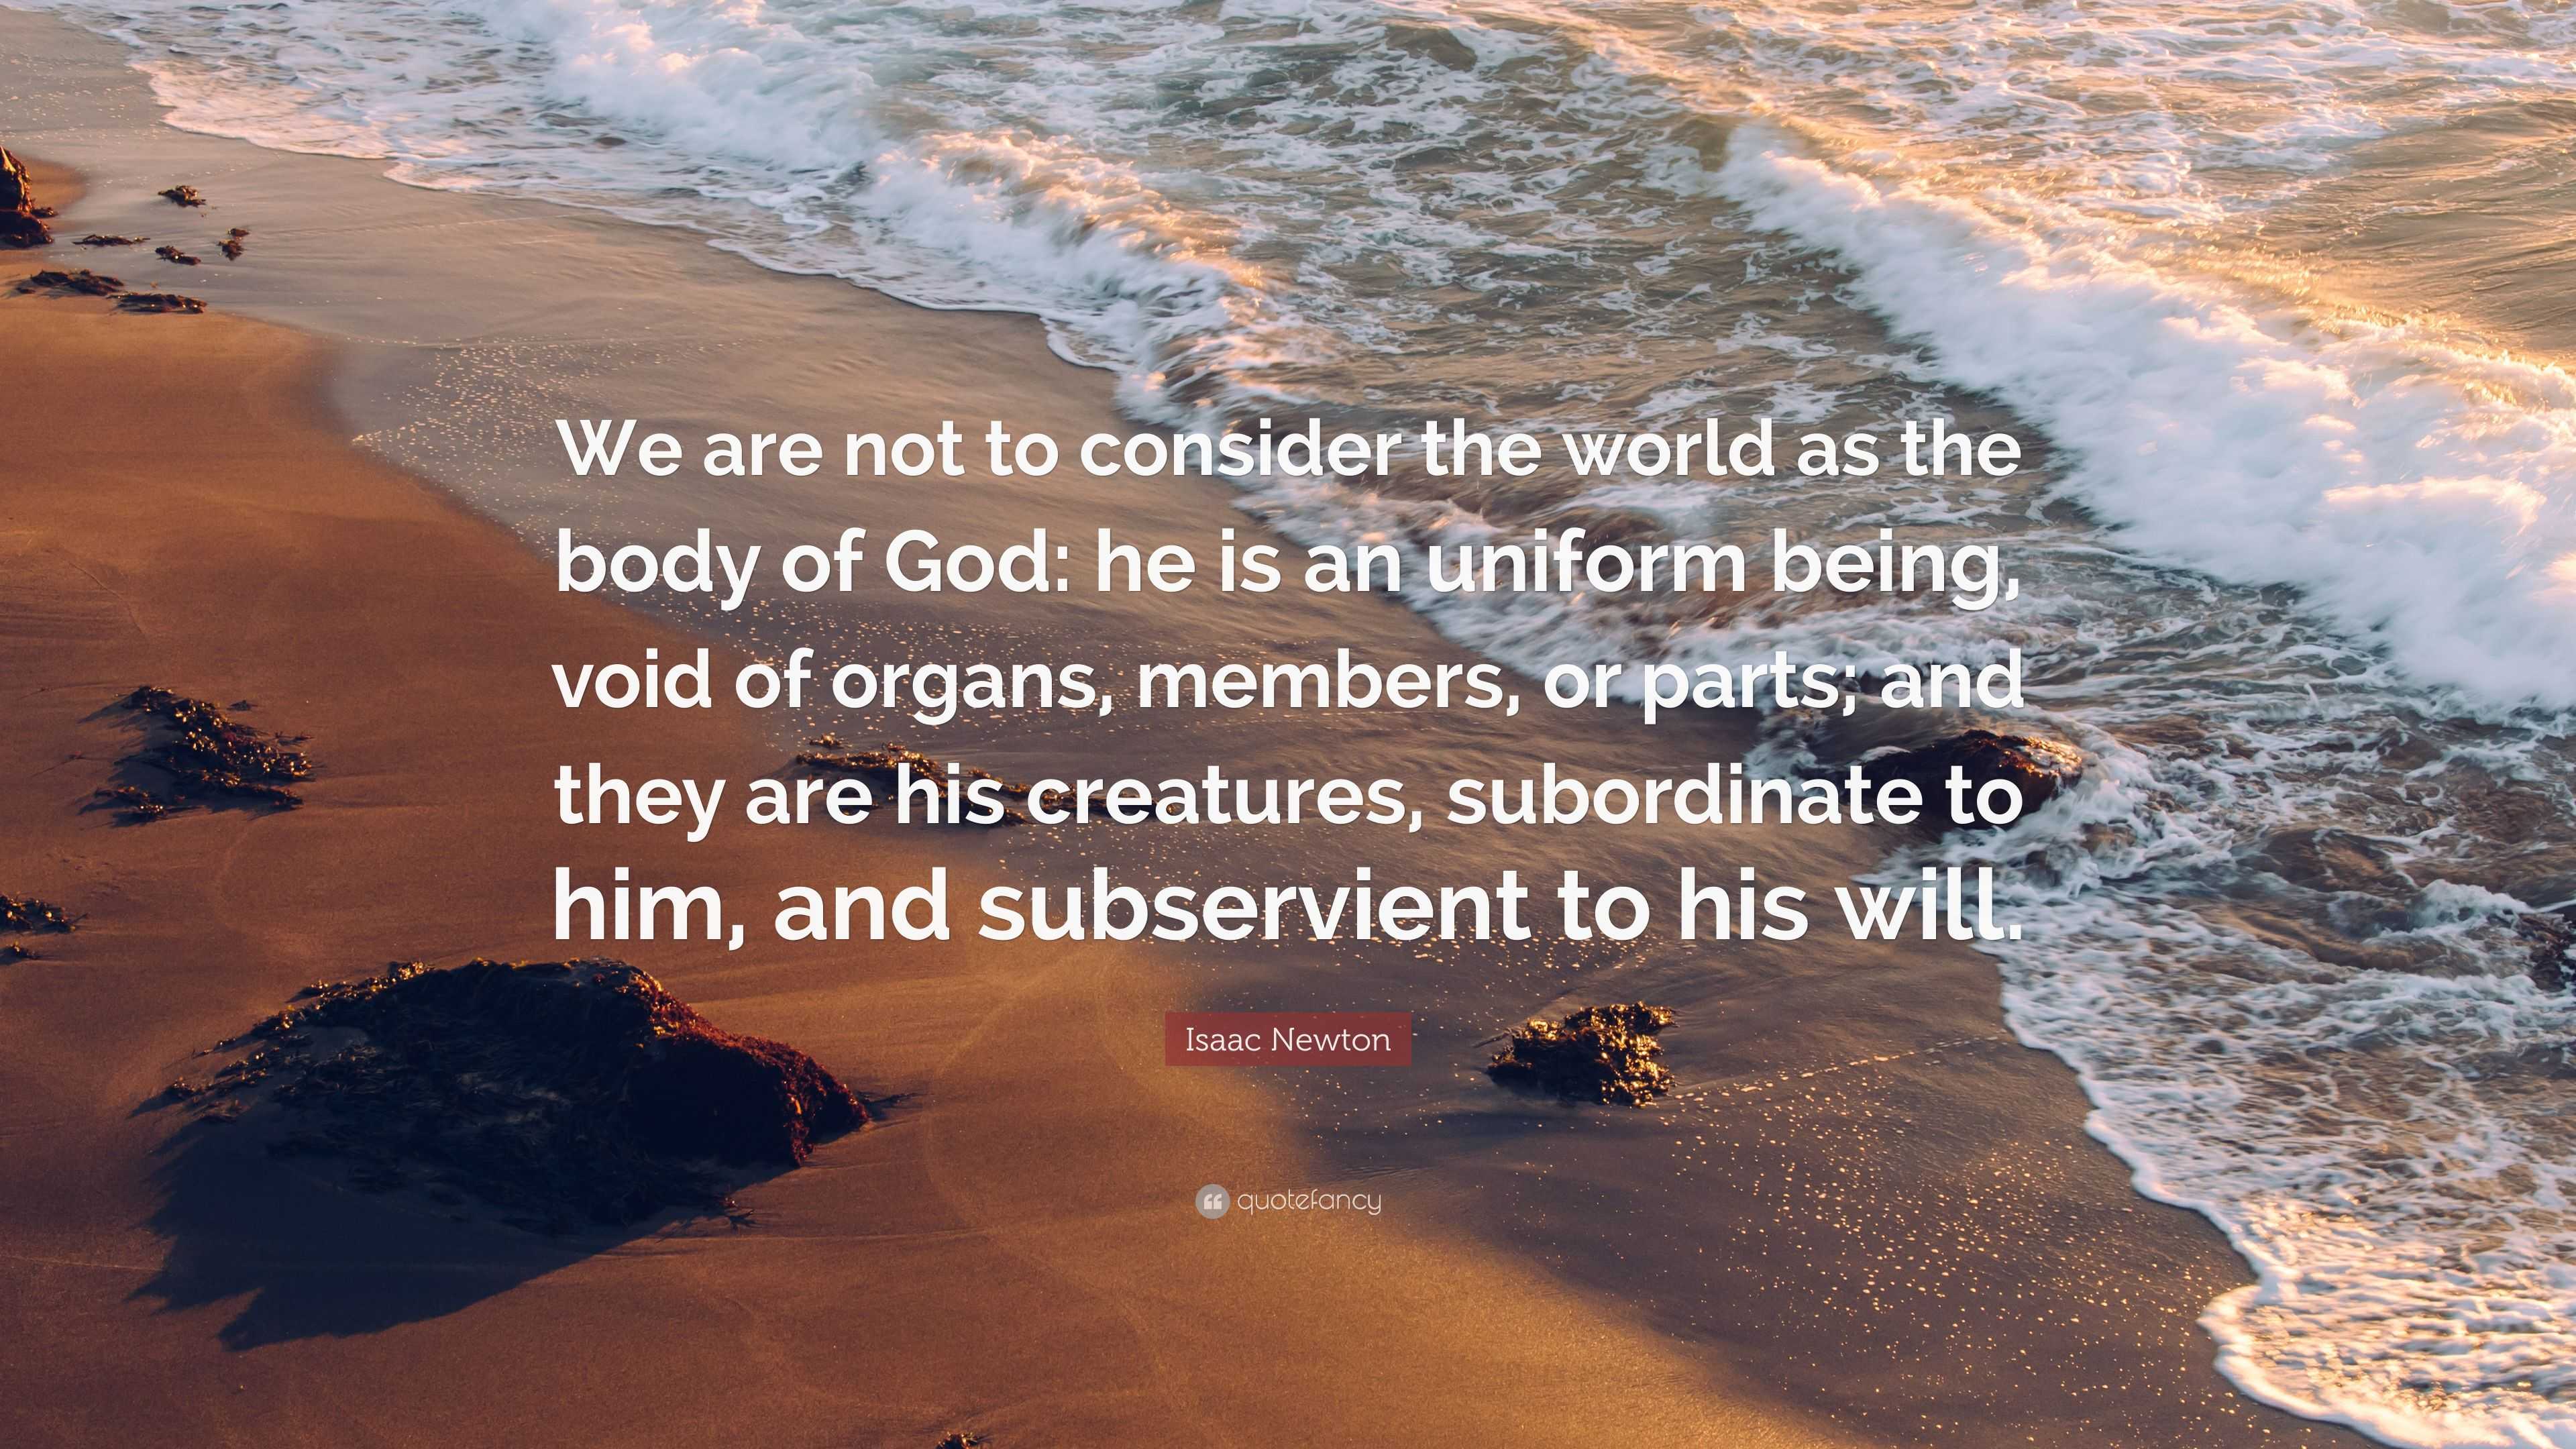 Isaac Newton Quote: "We are not to consider the world as the body of God: he is an uniform being ...